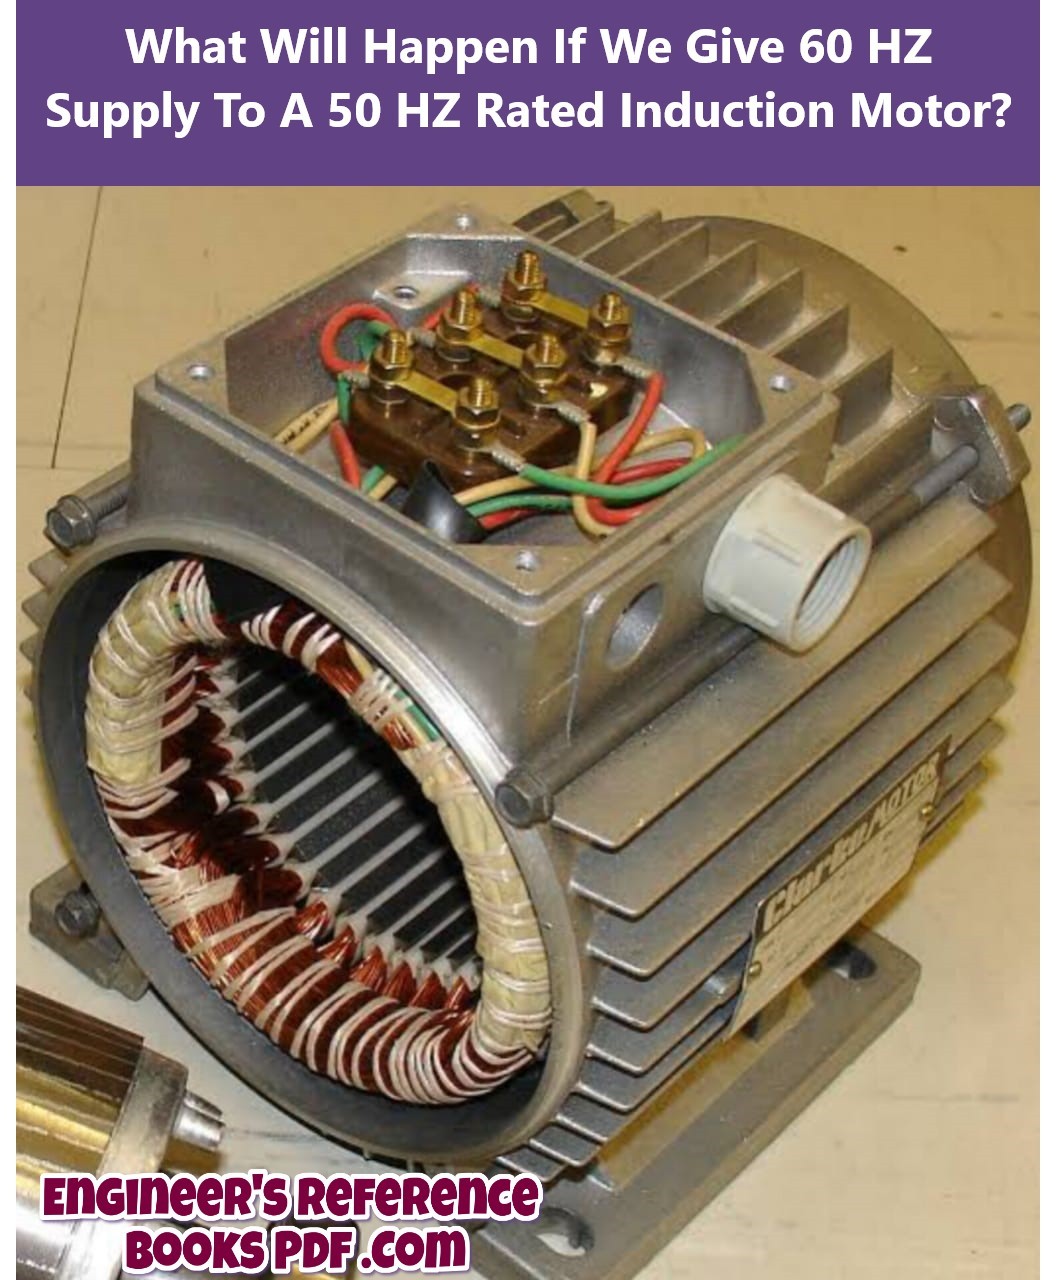 What Will Happen If We Give 60 HZ Supply To A 50 HZ Rated Induction Motor?
